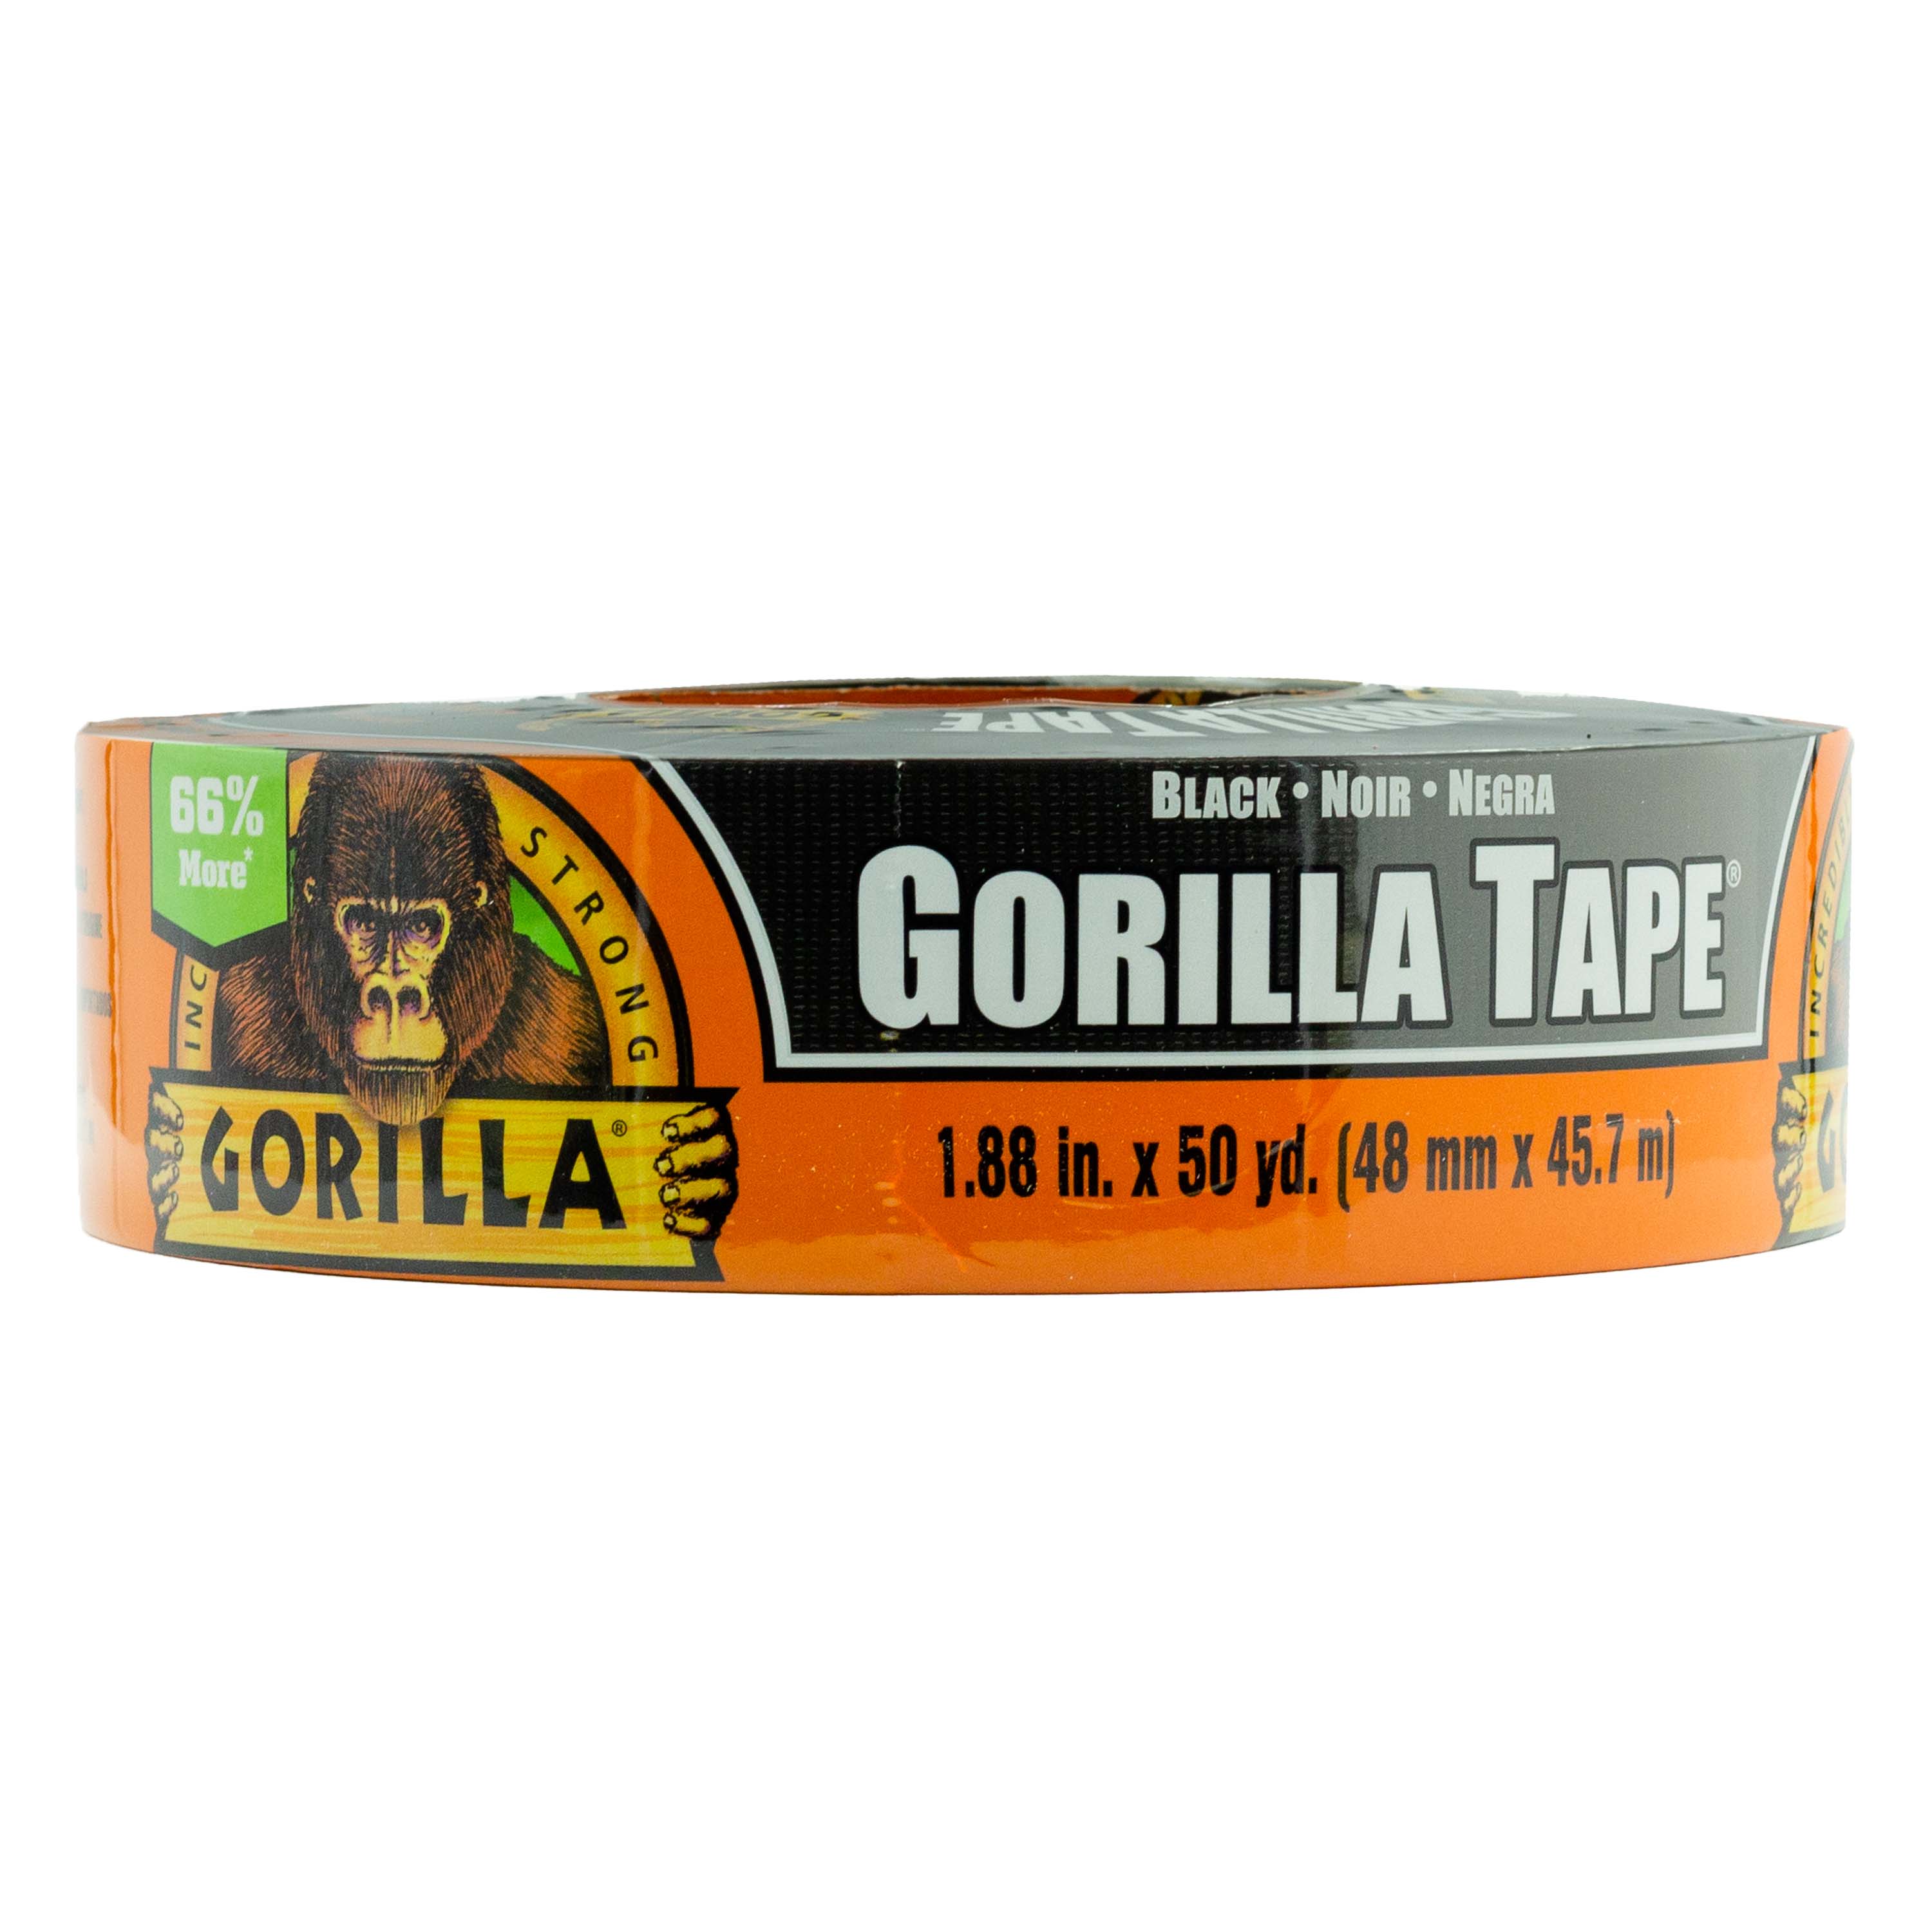 Gorilla Tough and Wide Clear Repair Clear Duct Tape 2.88-in x 15